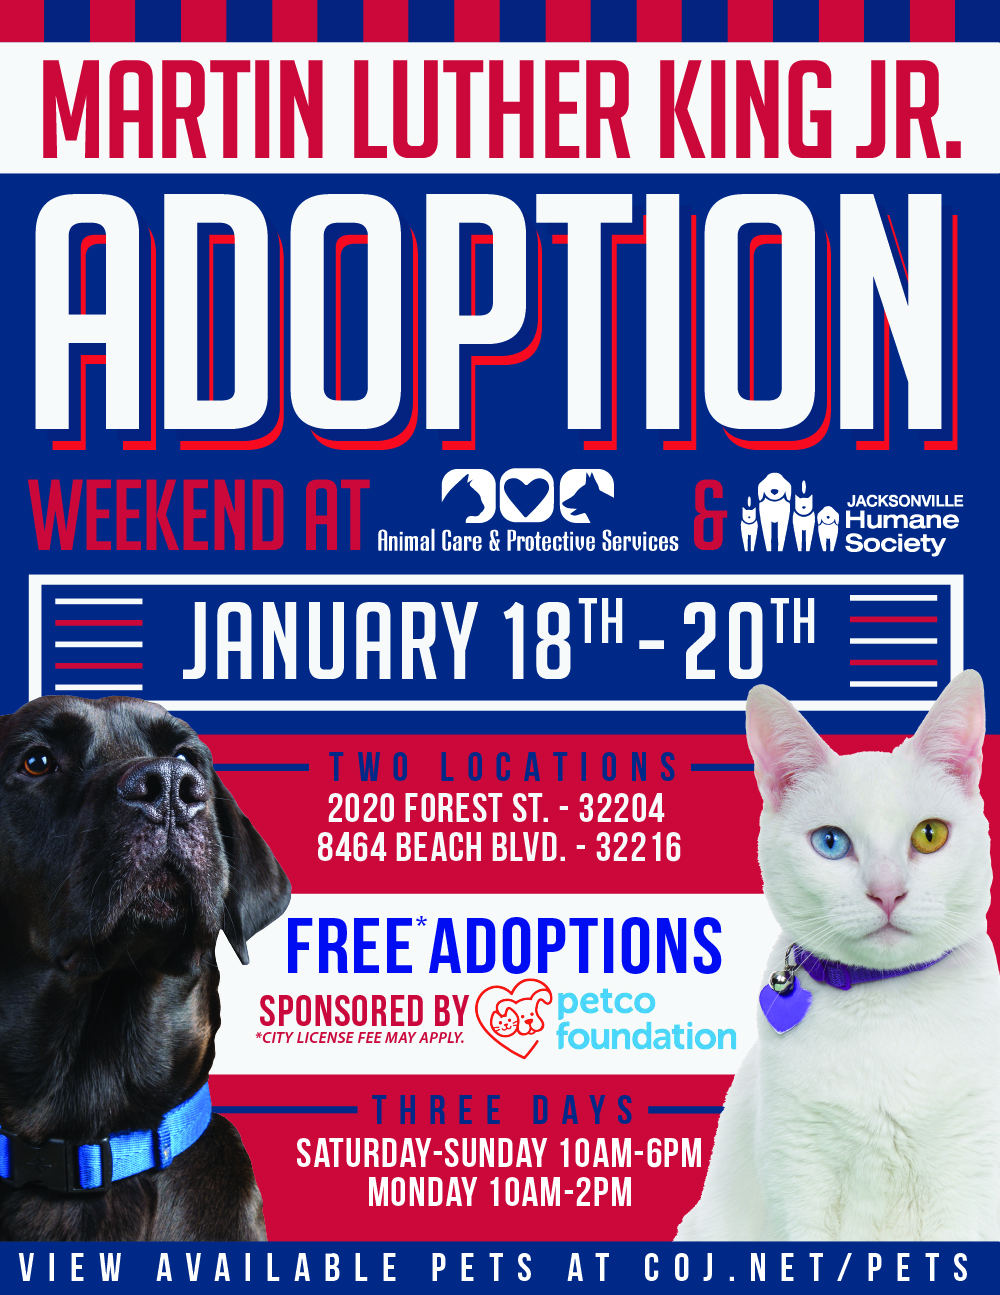 Martin Luther King Jr Adoption Event Weekend Flier with Black Dog and White Cat